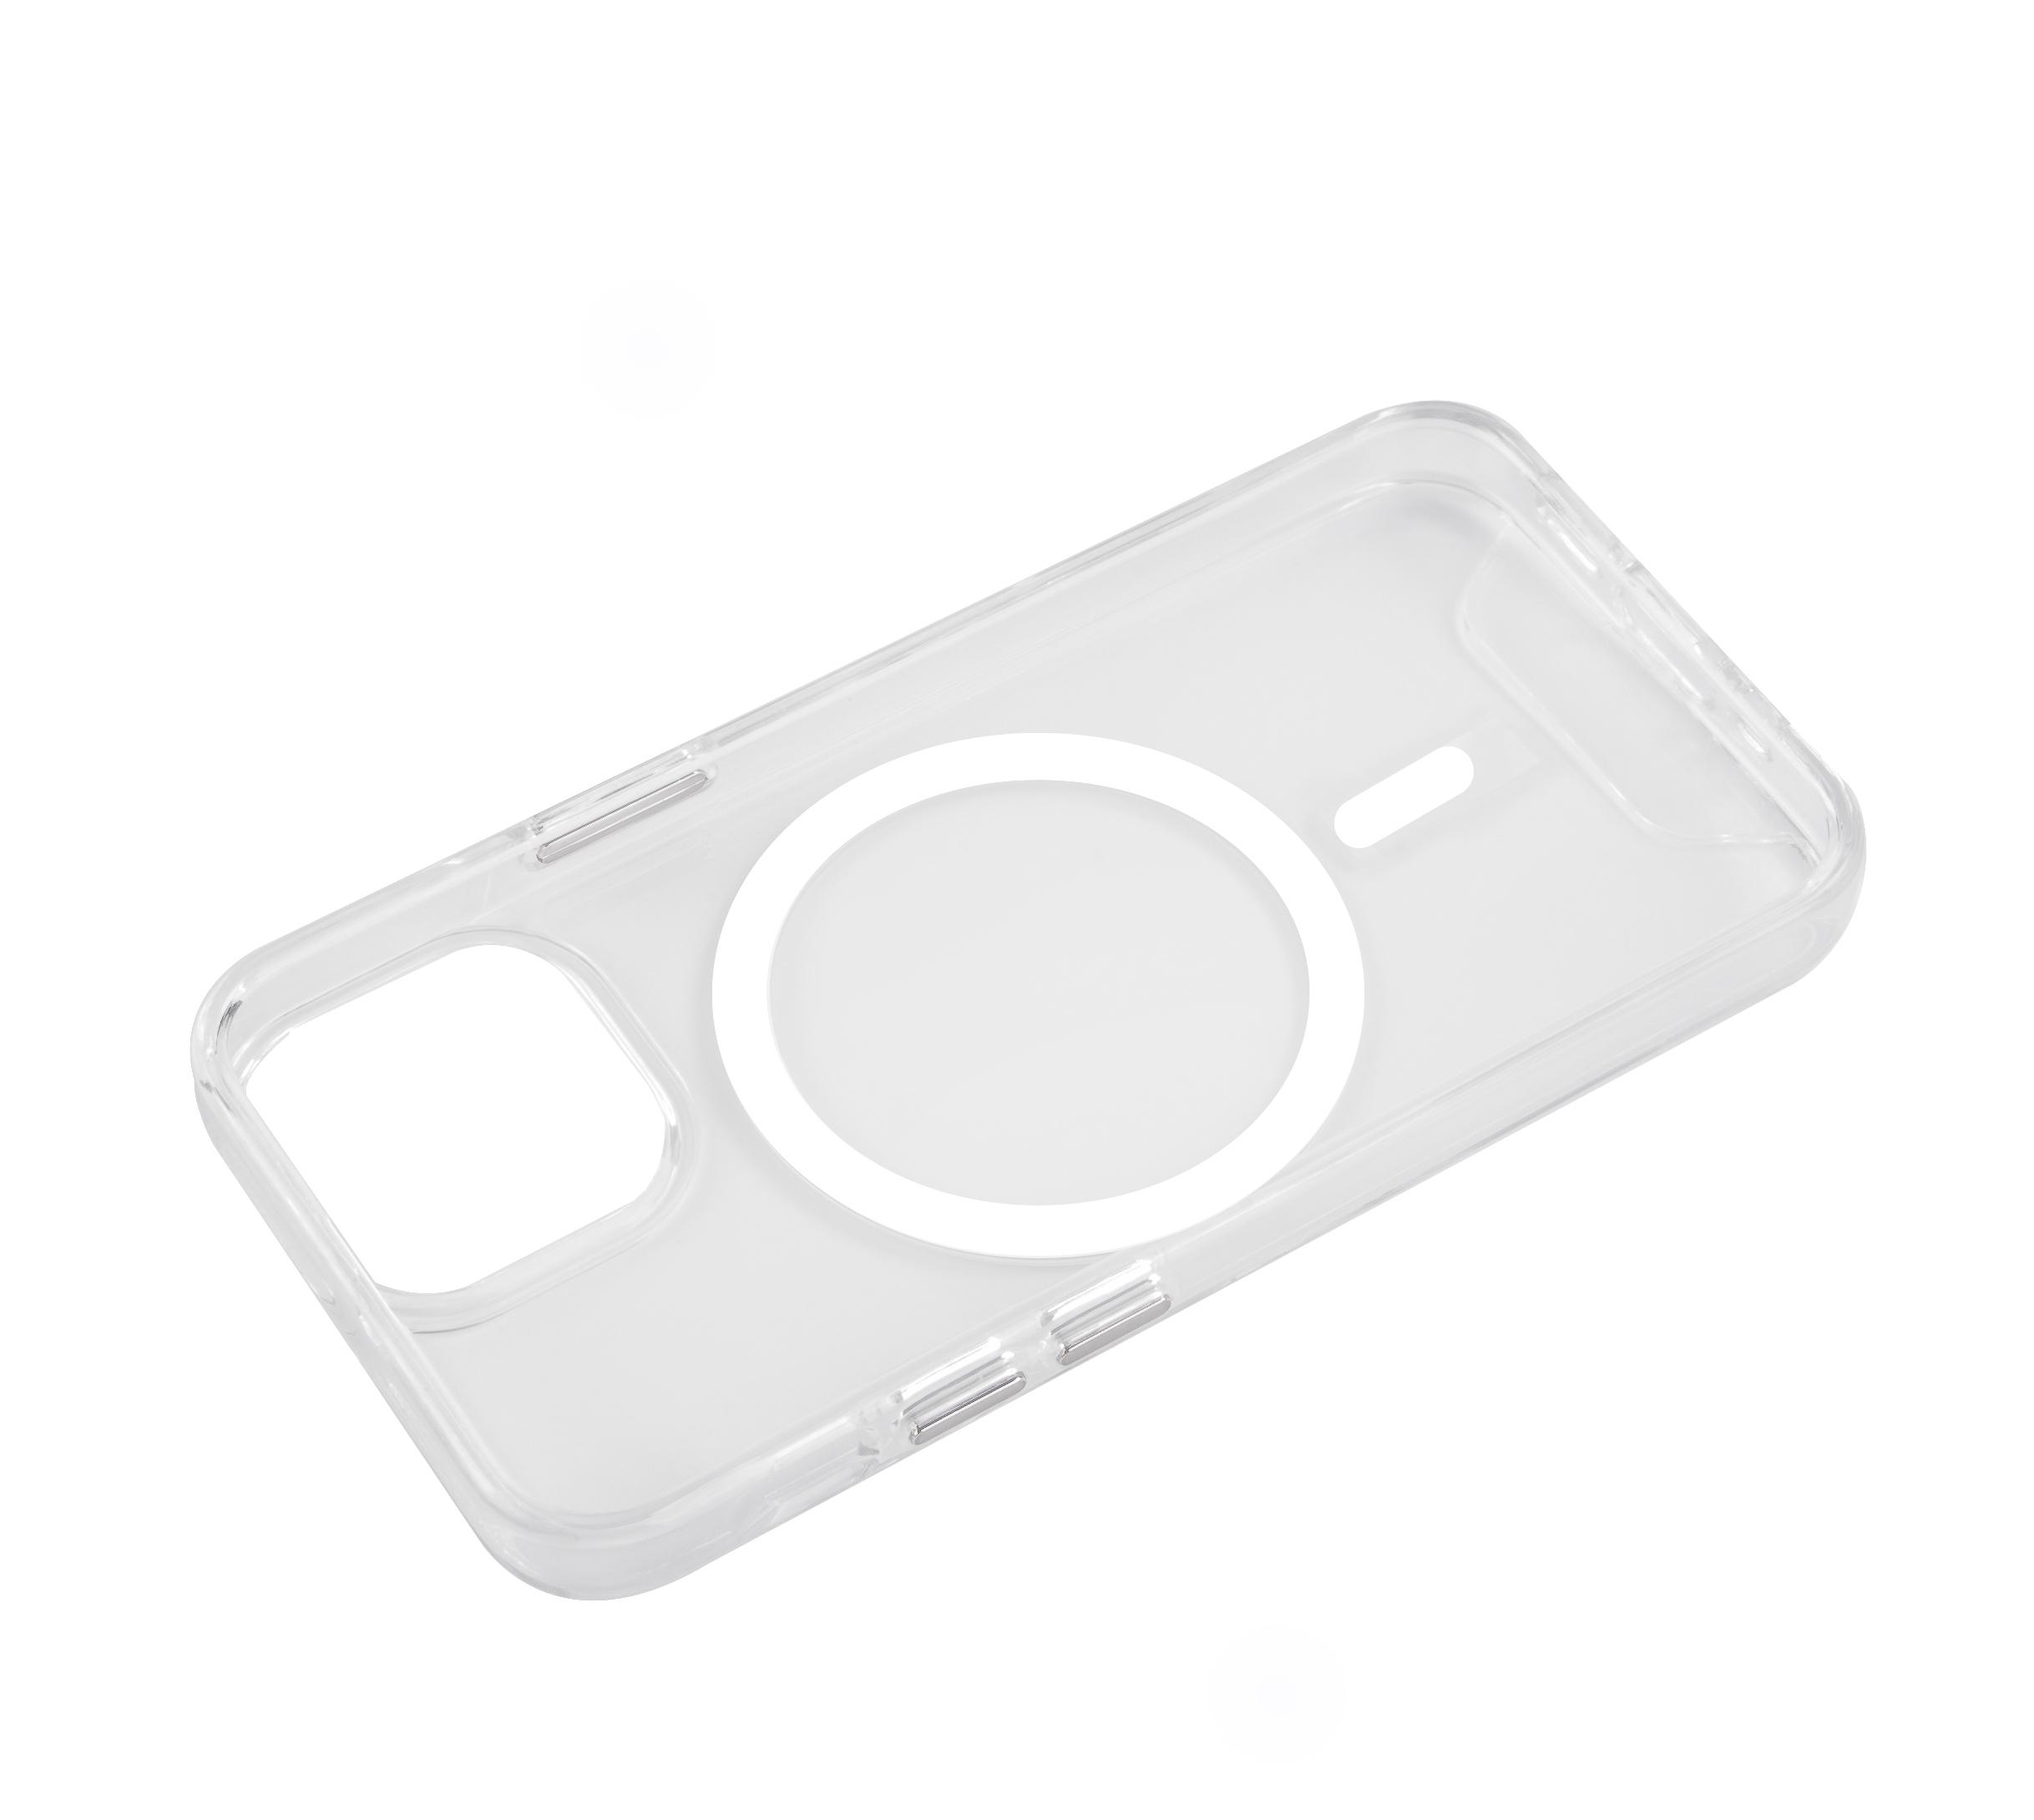 Backcover, ISY Transparent Apple, 15, 1111, iPhone ISC